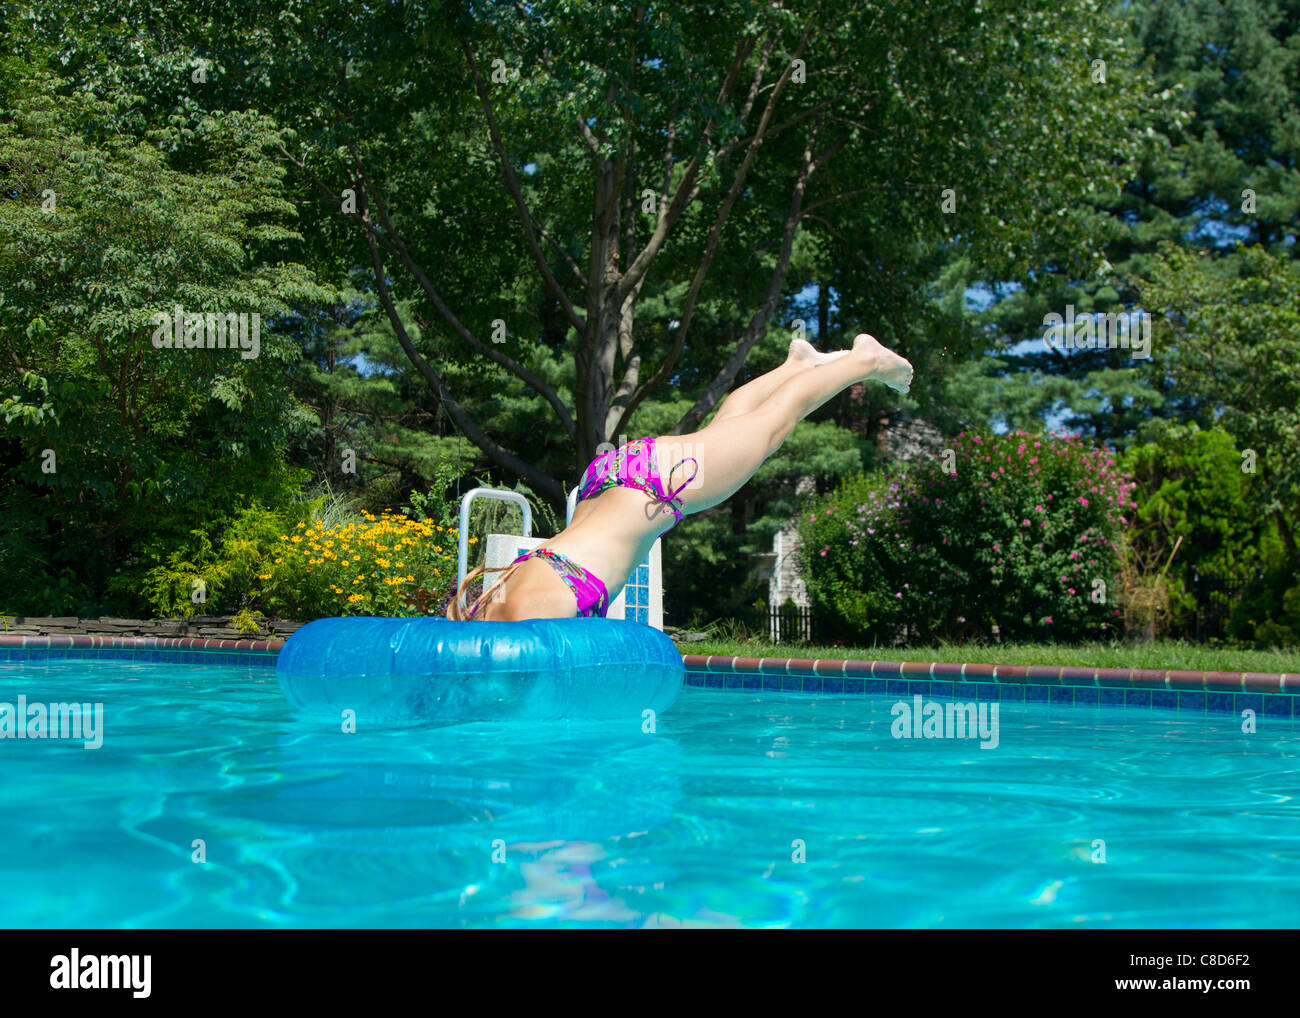 Young girl diving into a swimming pool Stock Photo